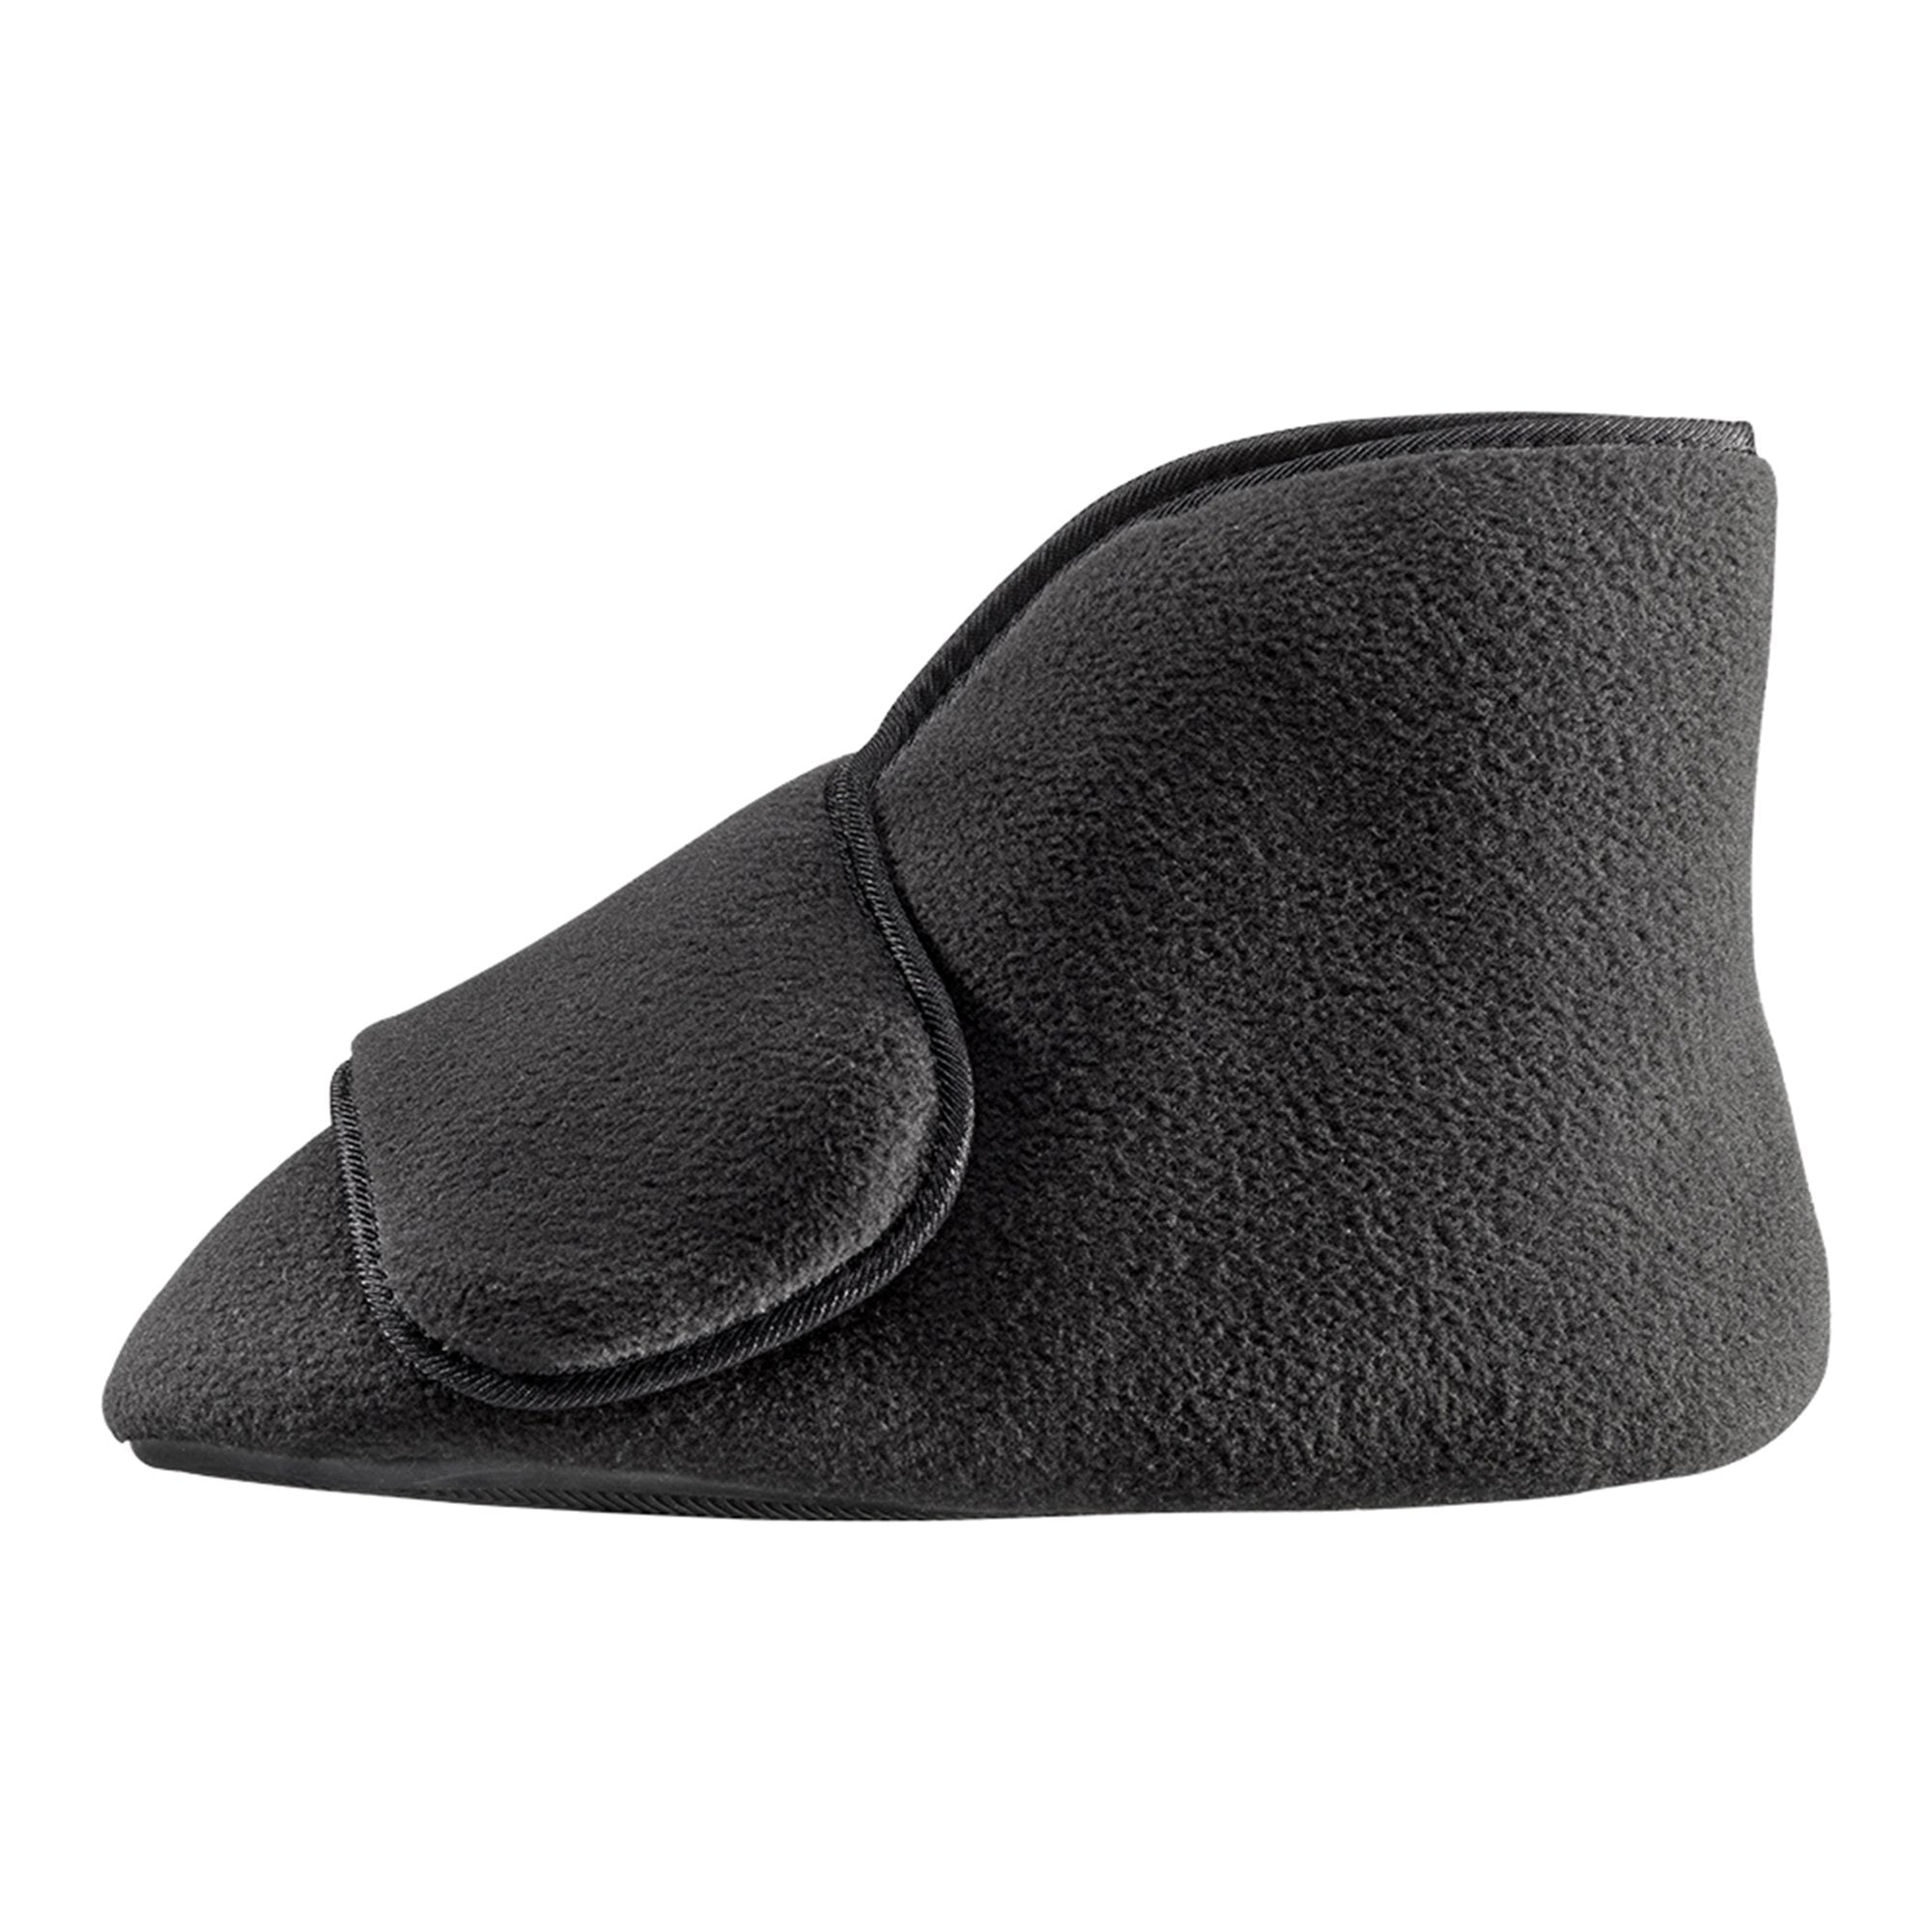 Diabetic Bootie Slippers Silverts X-Small / X-Wide Black Ankle High